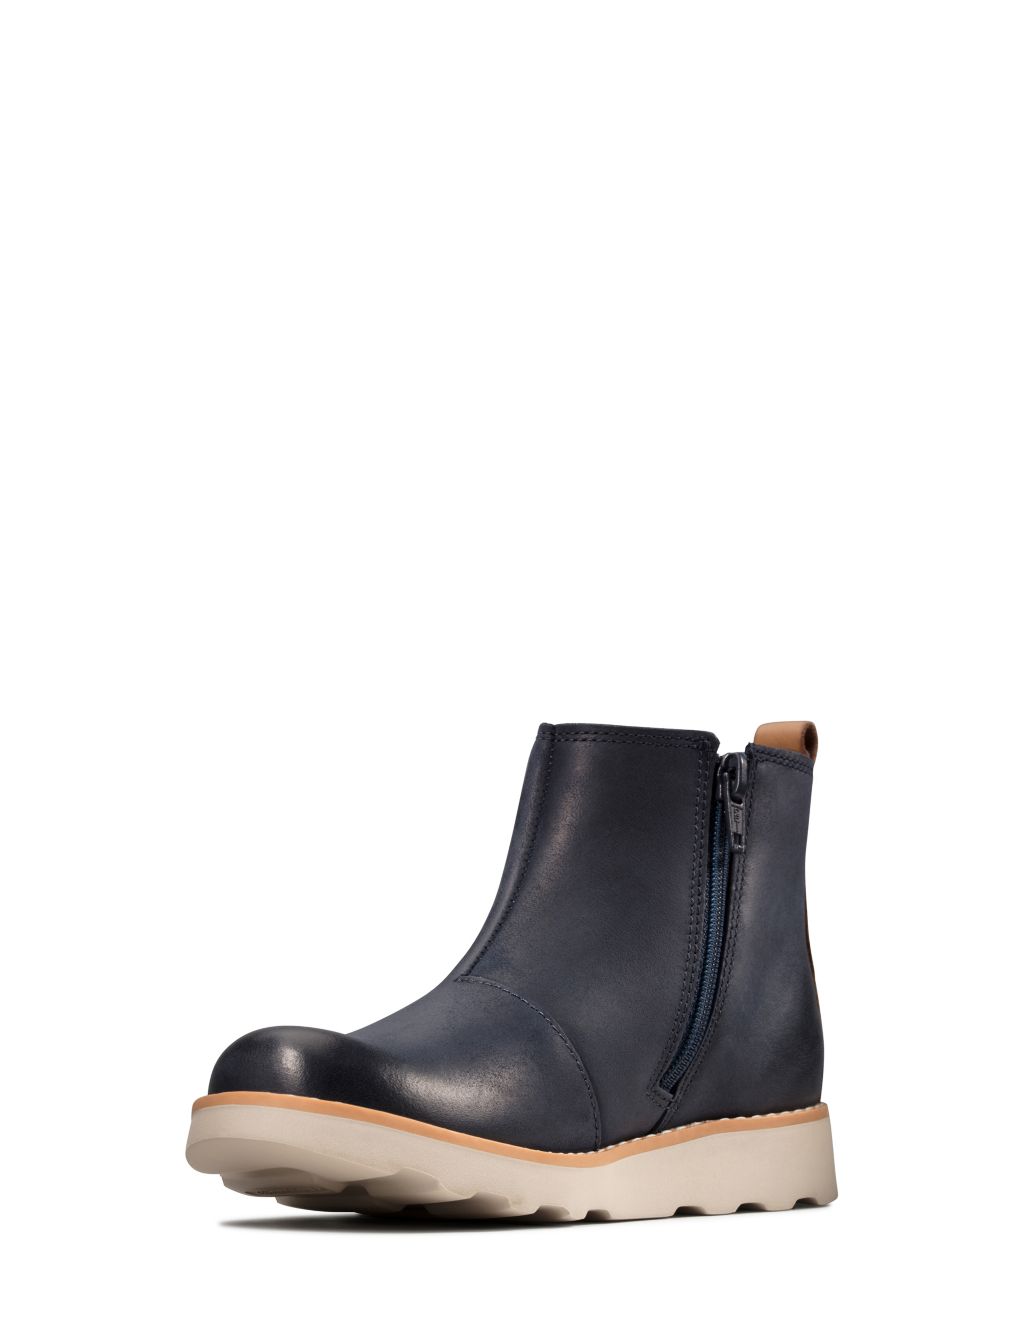 Kids' Leather Chelsea Boots image 3